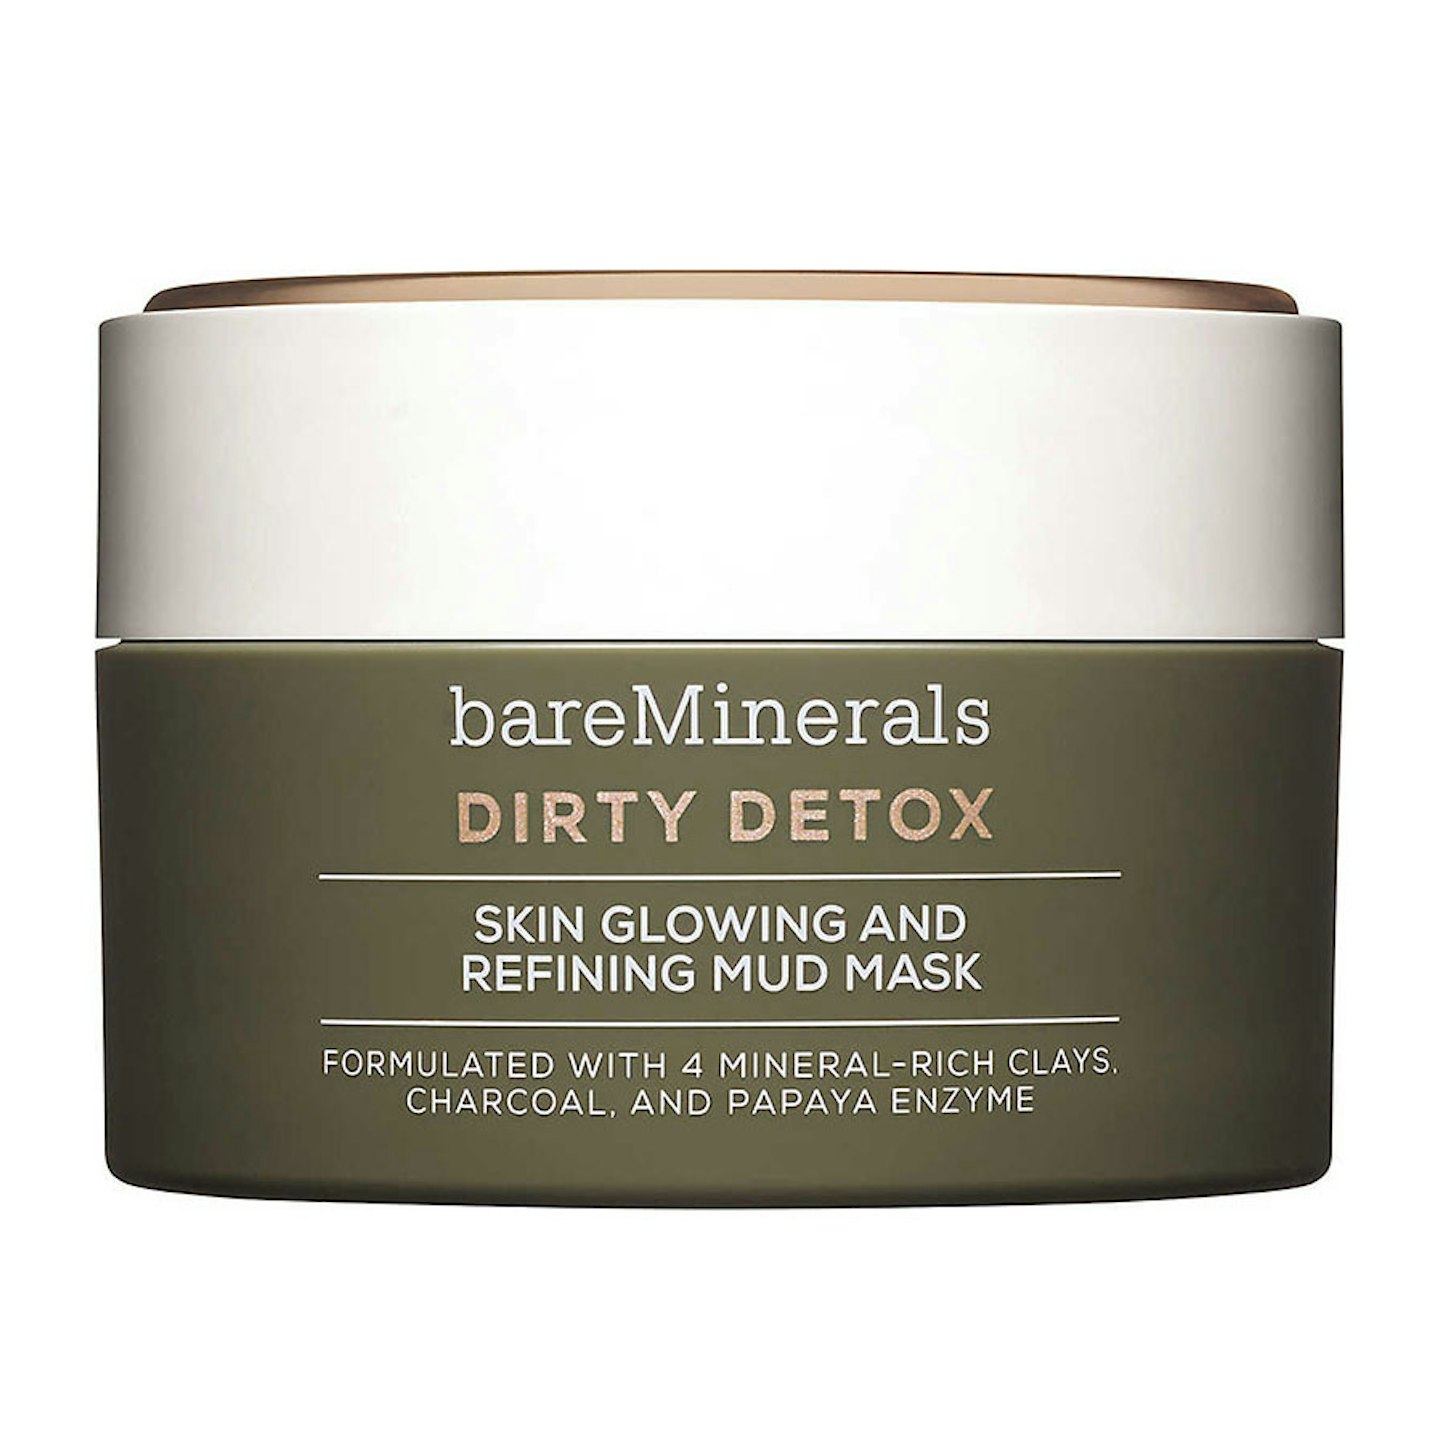 Bare Minerals Dirty Detox Skin Glowing And Refining Mud Mask, £33